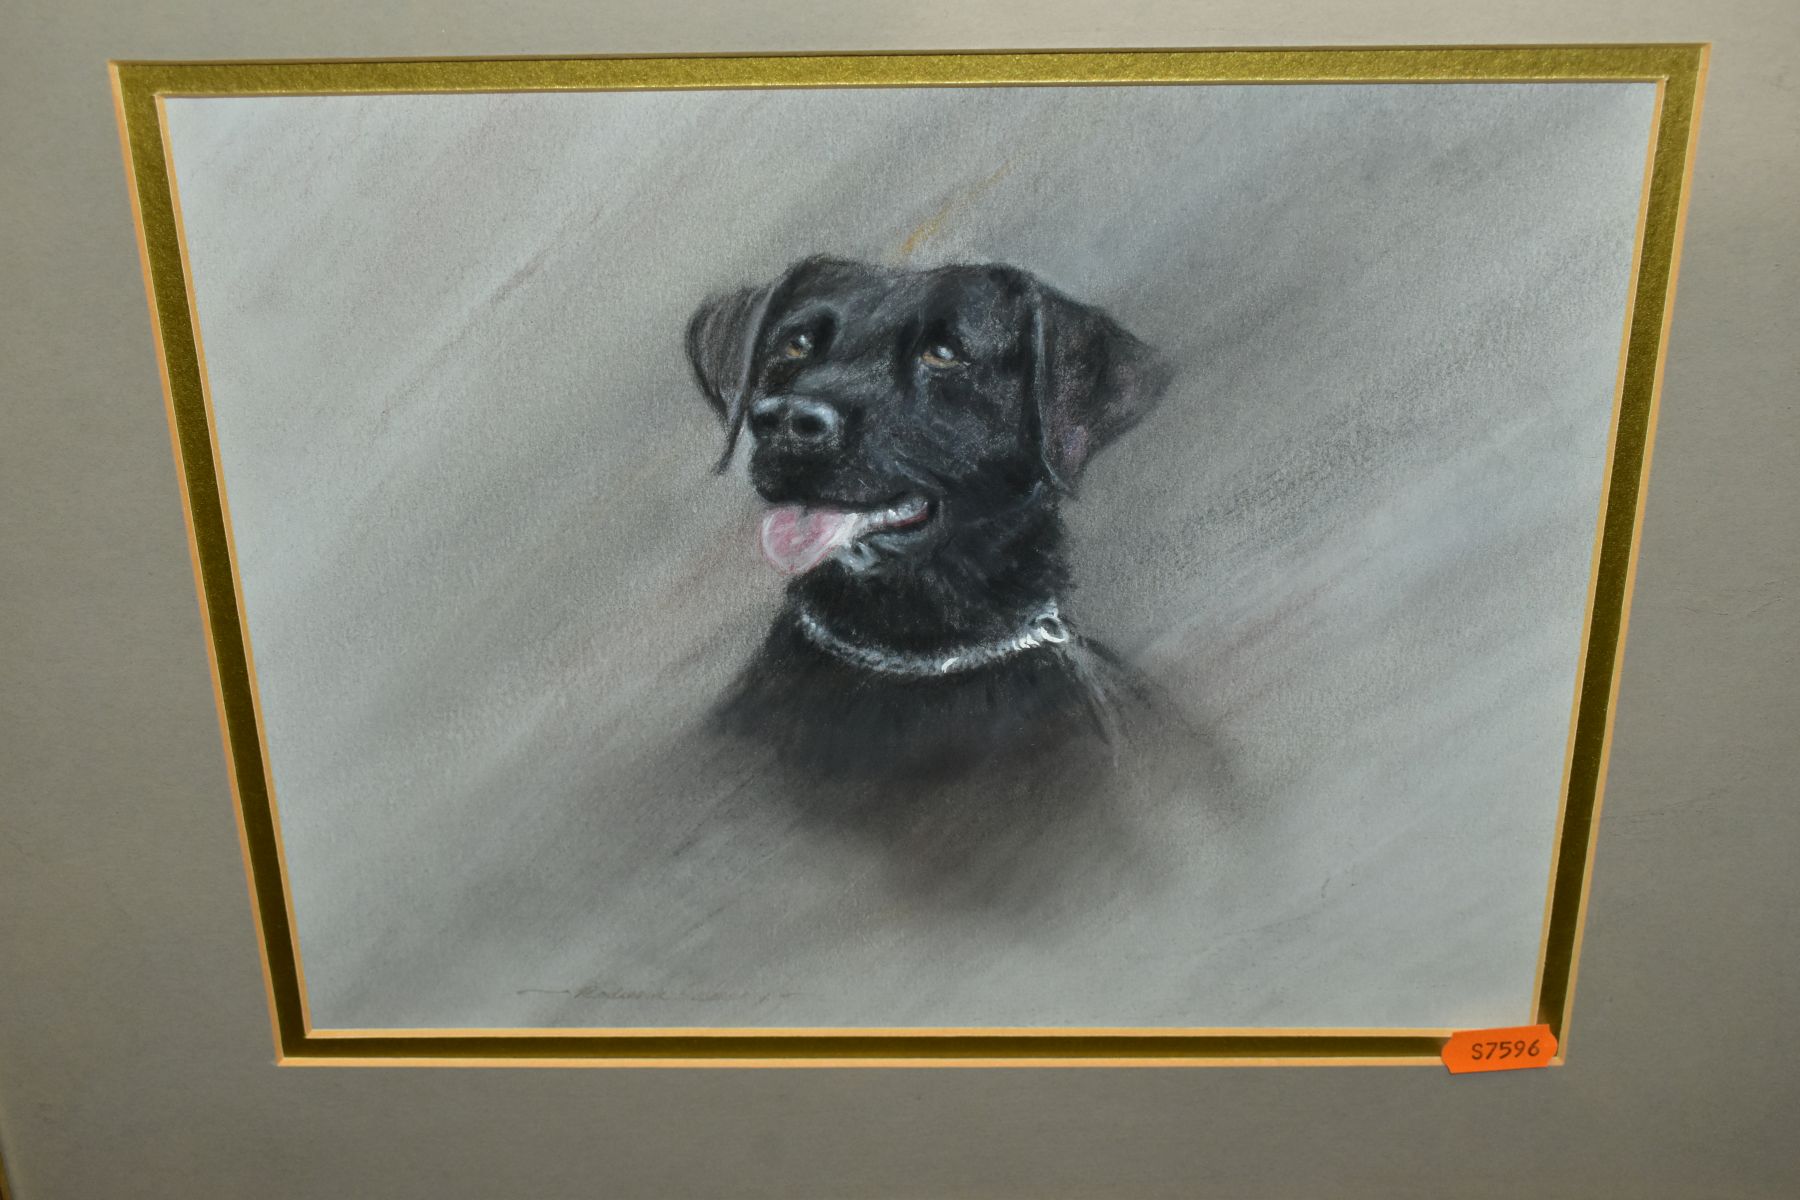 RODERICK LOVESEY (BRITISH 1944-2002) two pastel portrait sketches of dogs, a Retriever and a Black - Image 6 of 7